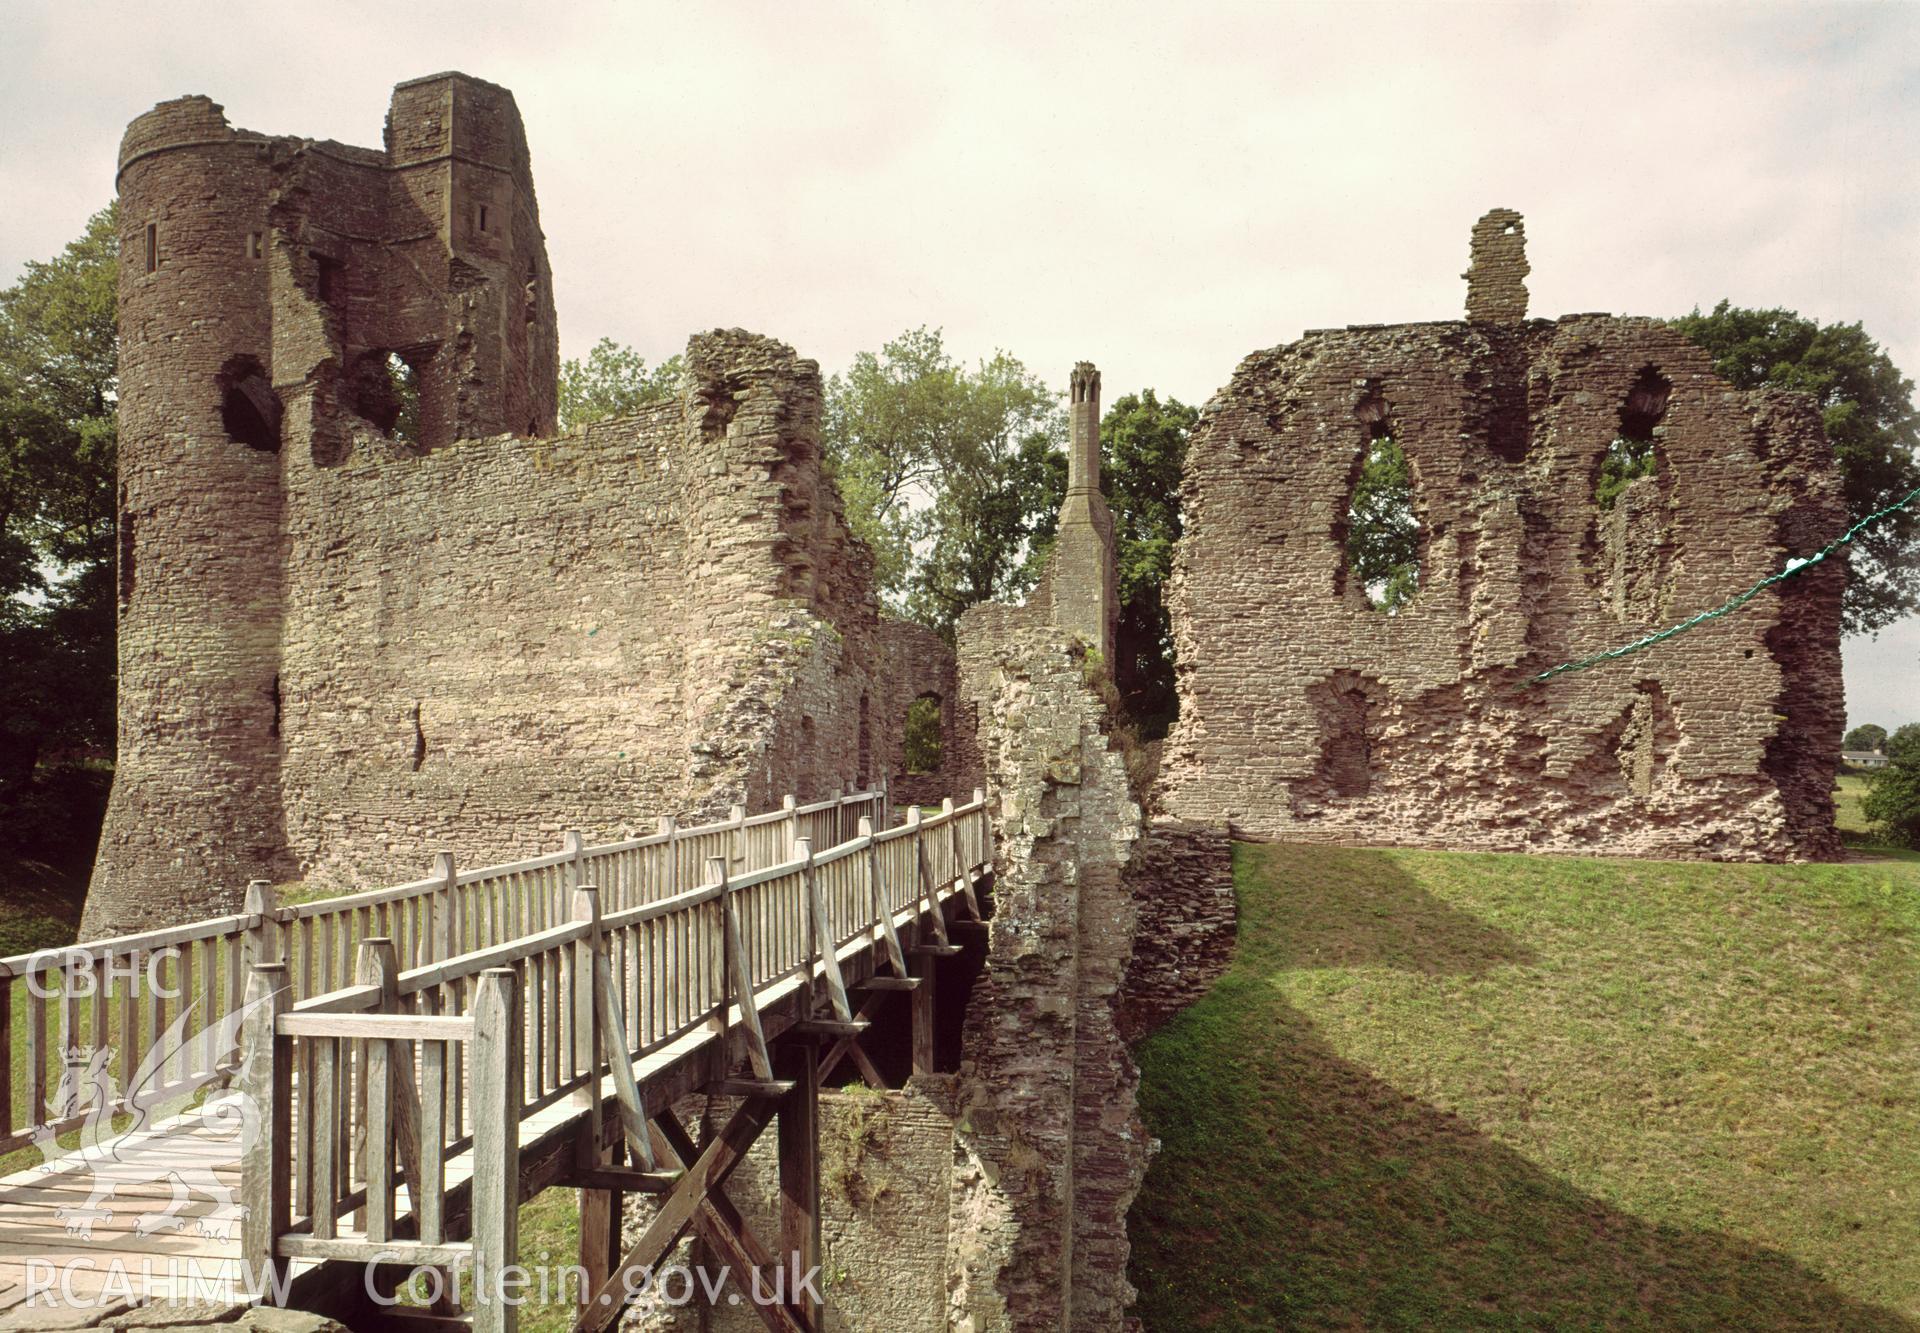 View of Grosmont Castle from the south taken in 1975.